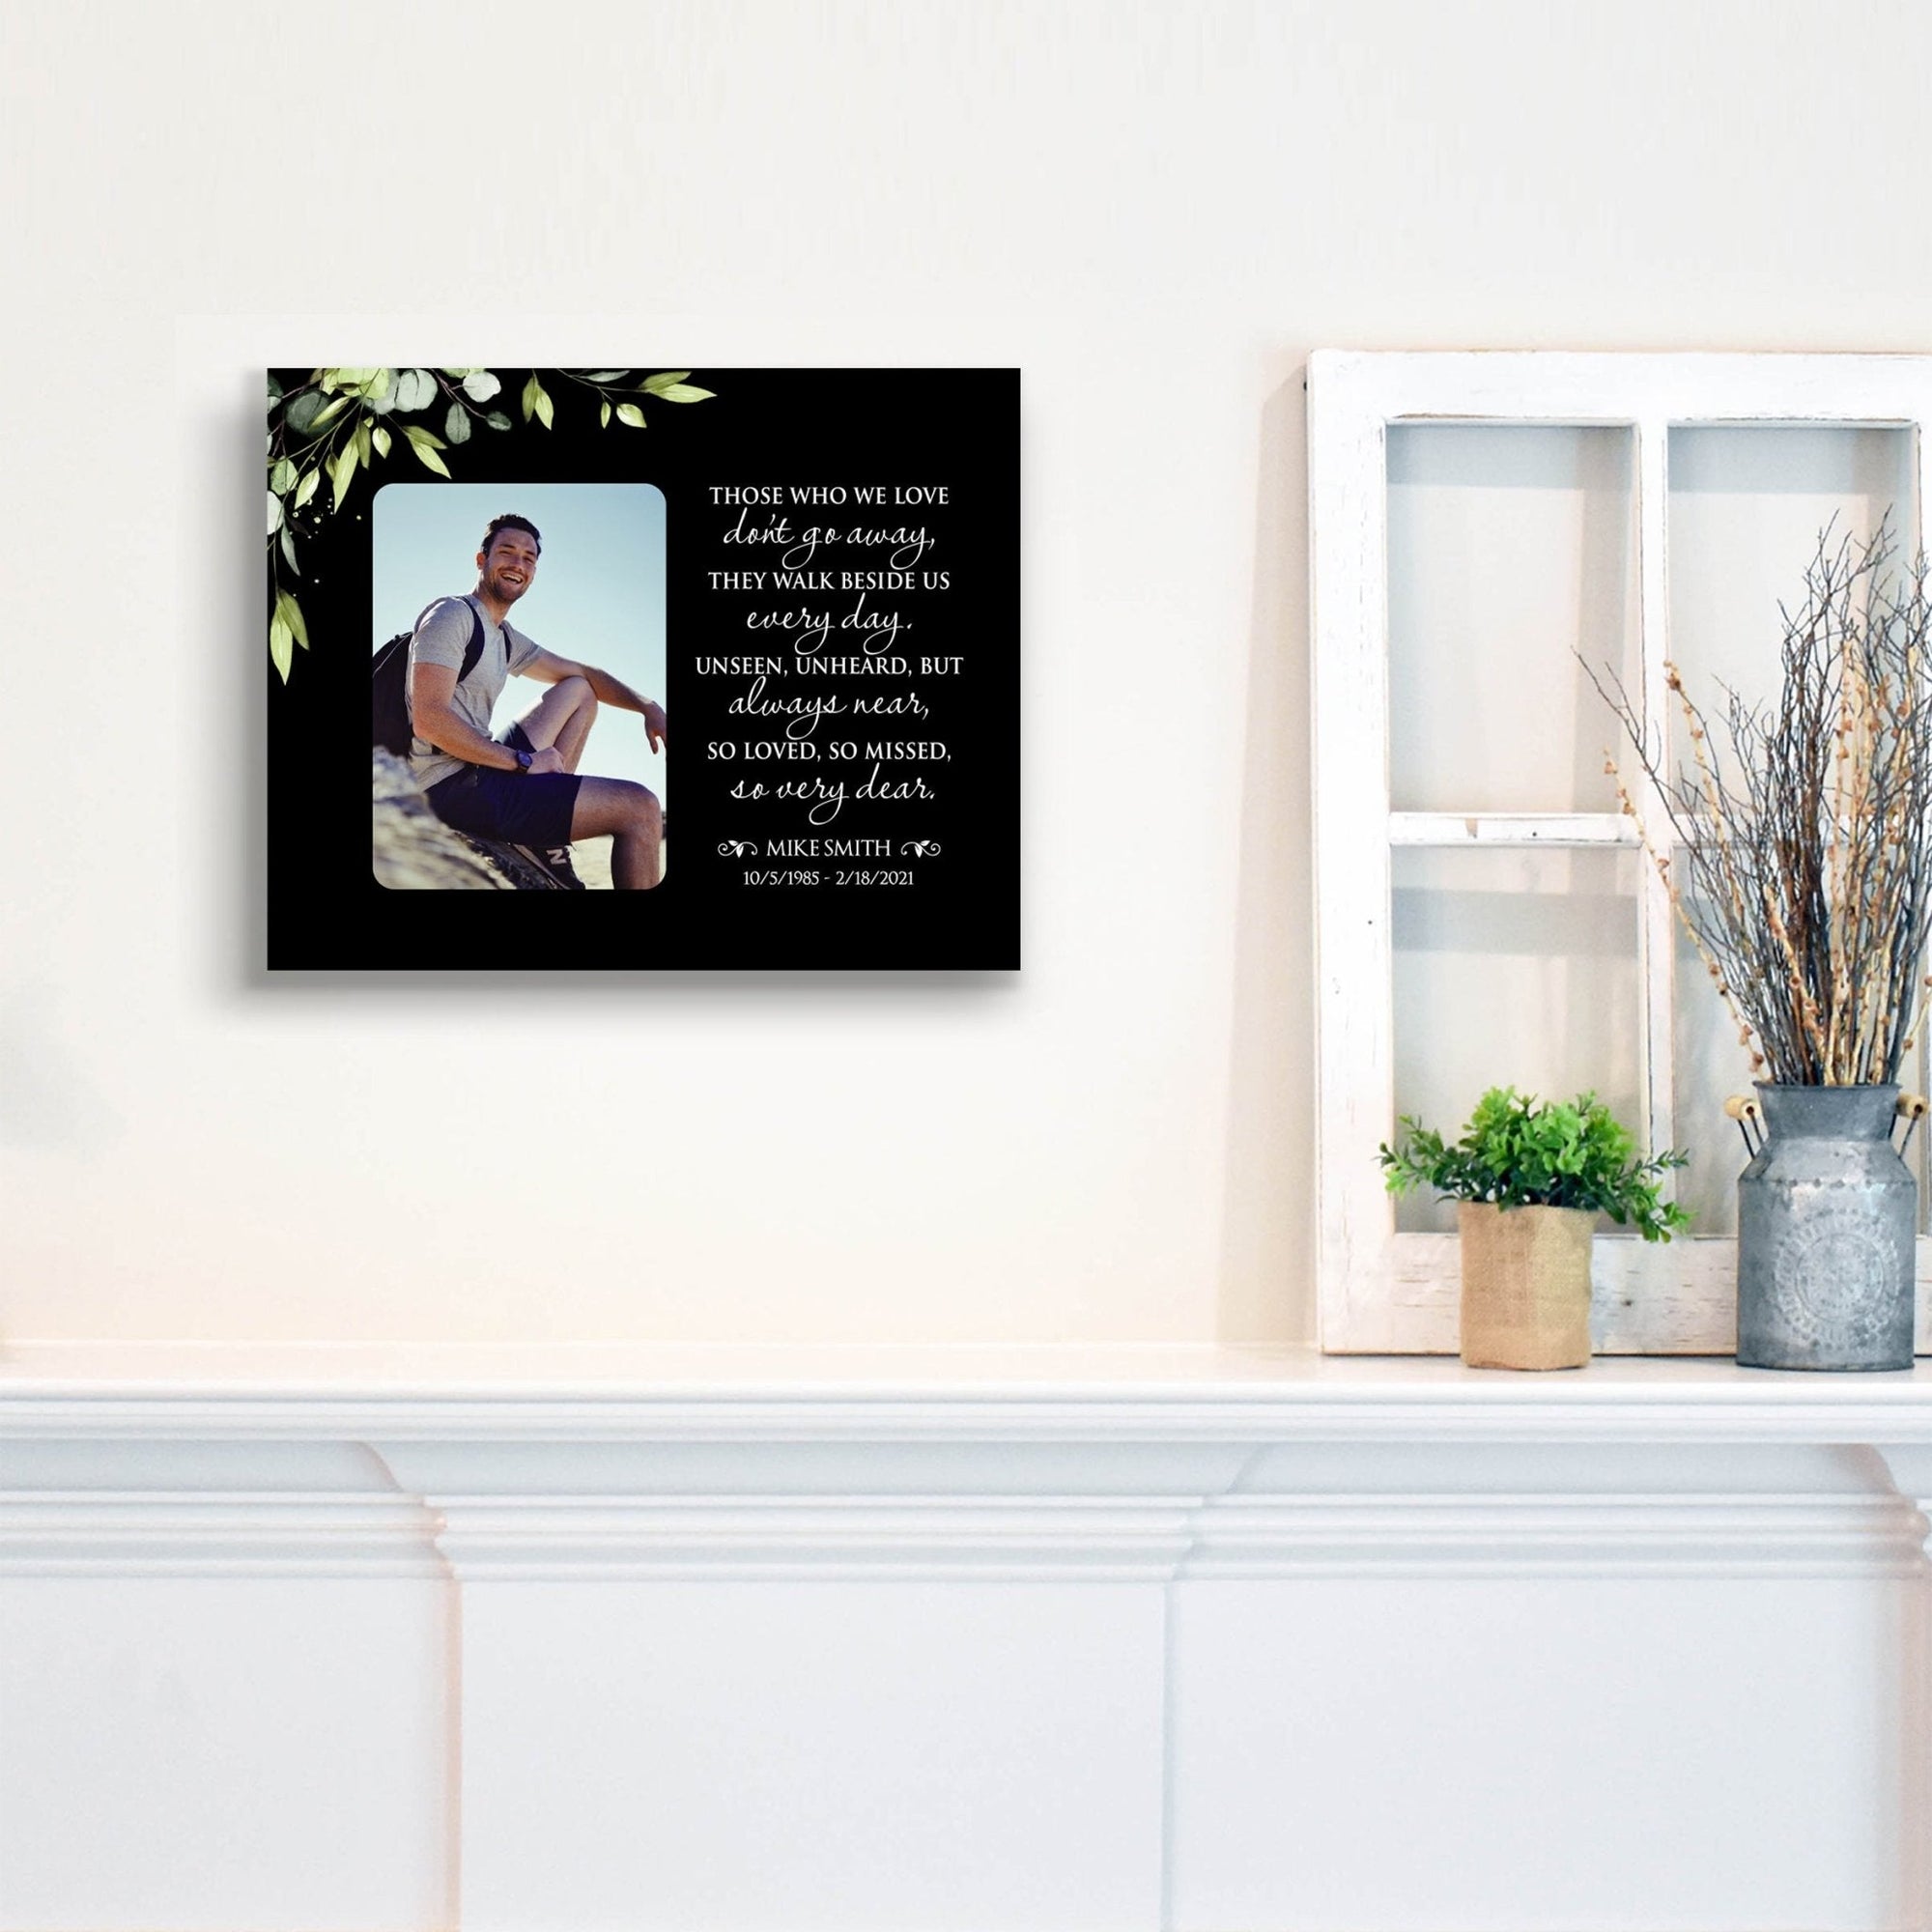 Personalized Human Memorial Black Photo & Inspirational Verse Bereavement Wall Décor & Sympathy Gift Ideas - Those Who We Love - LifeSong Milestones